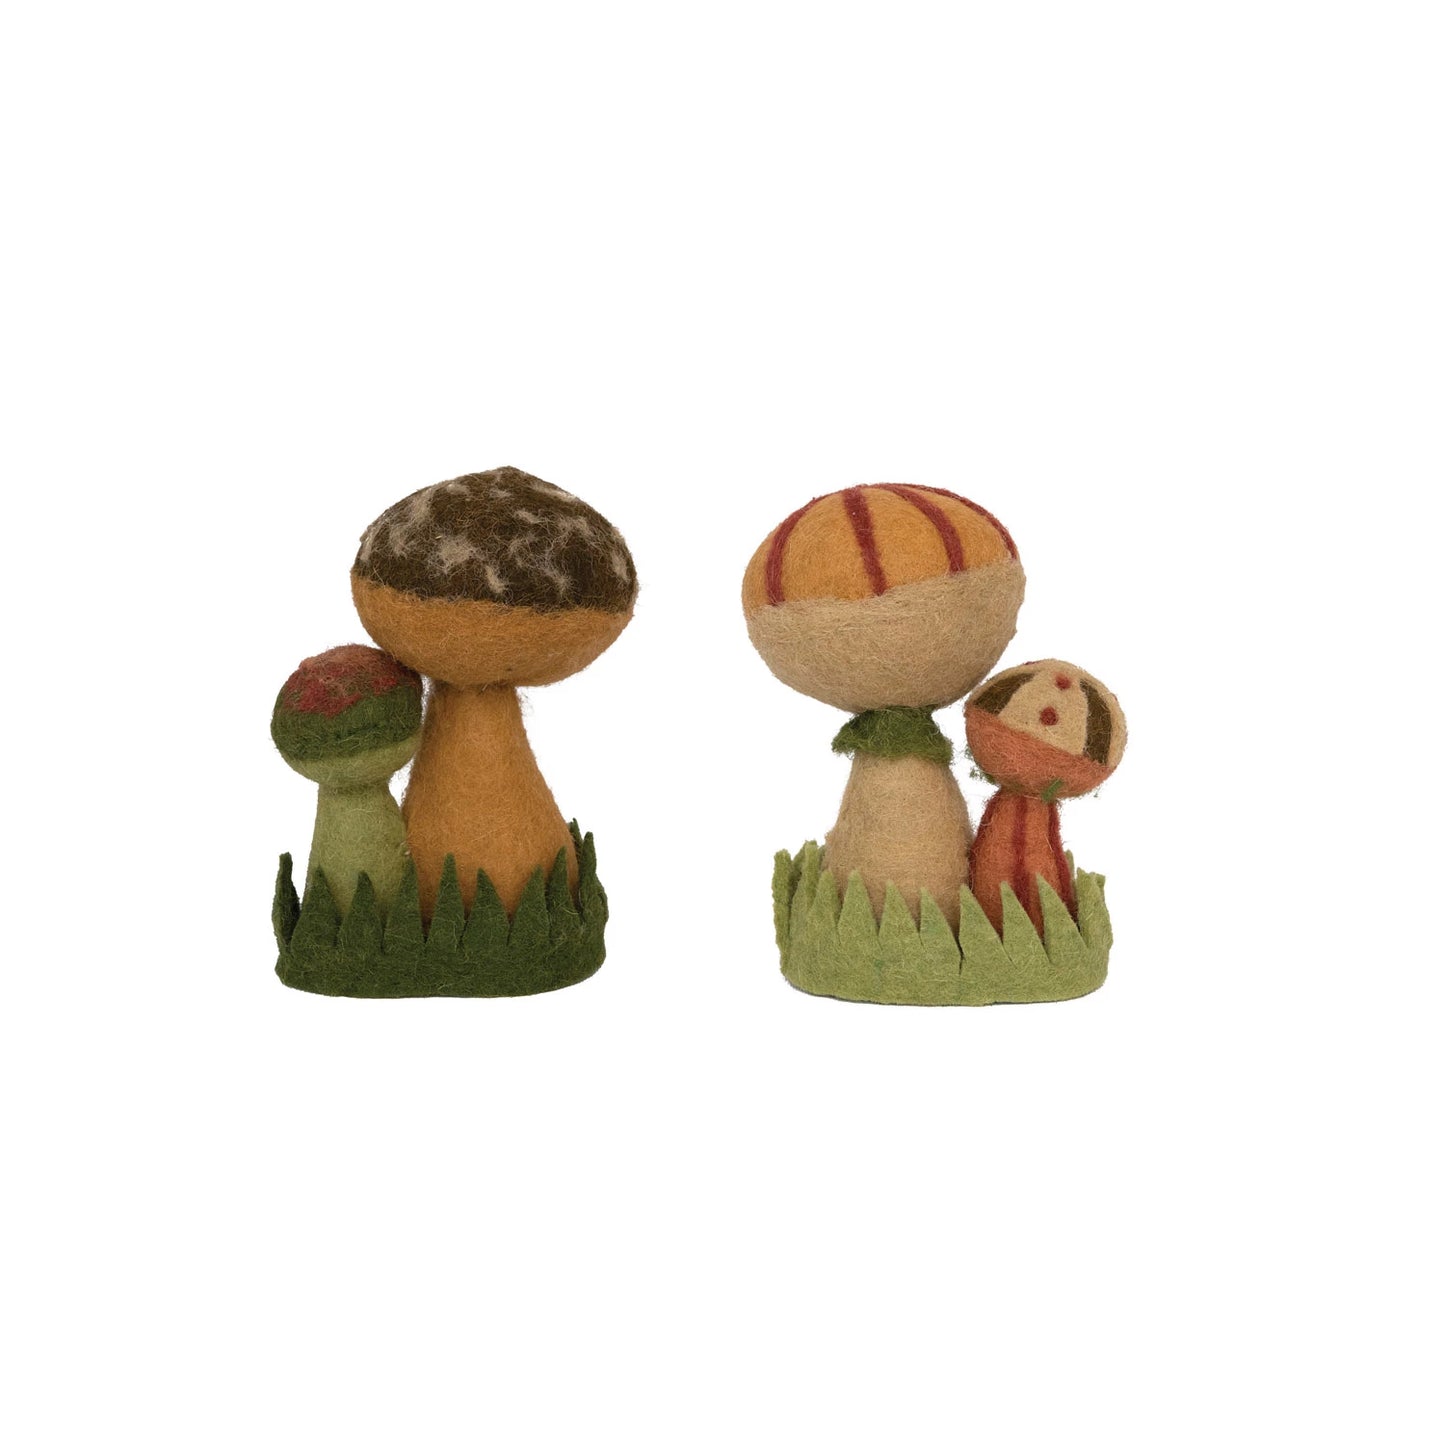 both styles of wool felt mushrooms displayed against a white background